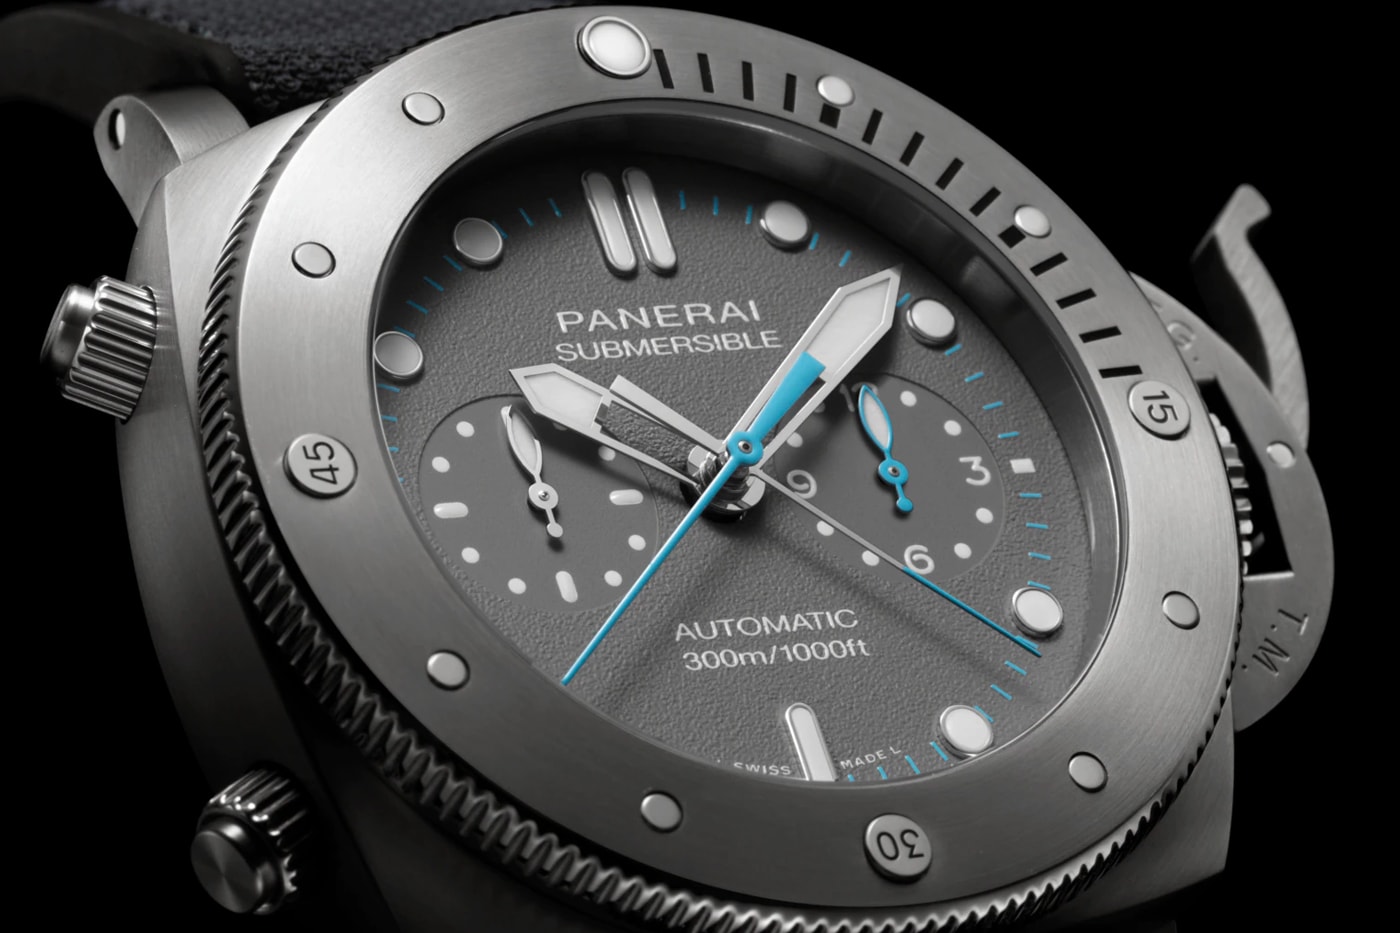 Panerai Submersible Chrono Flyback Jimmy Chin Edition info adventure DLC watches diving climbing 